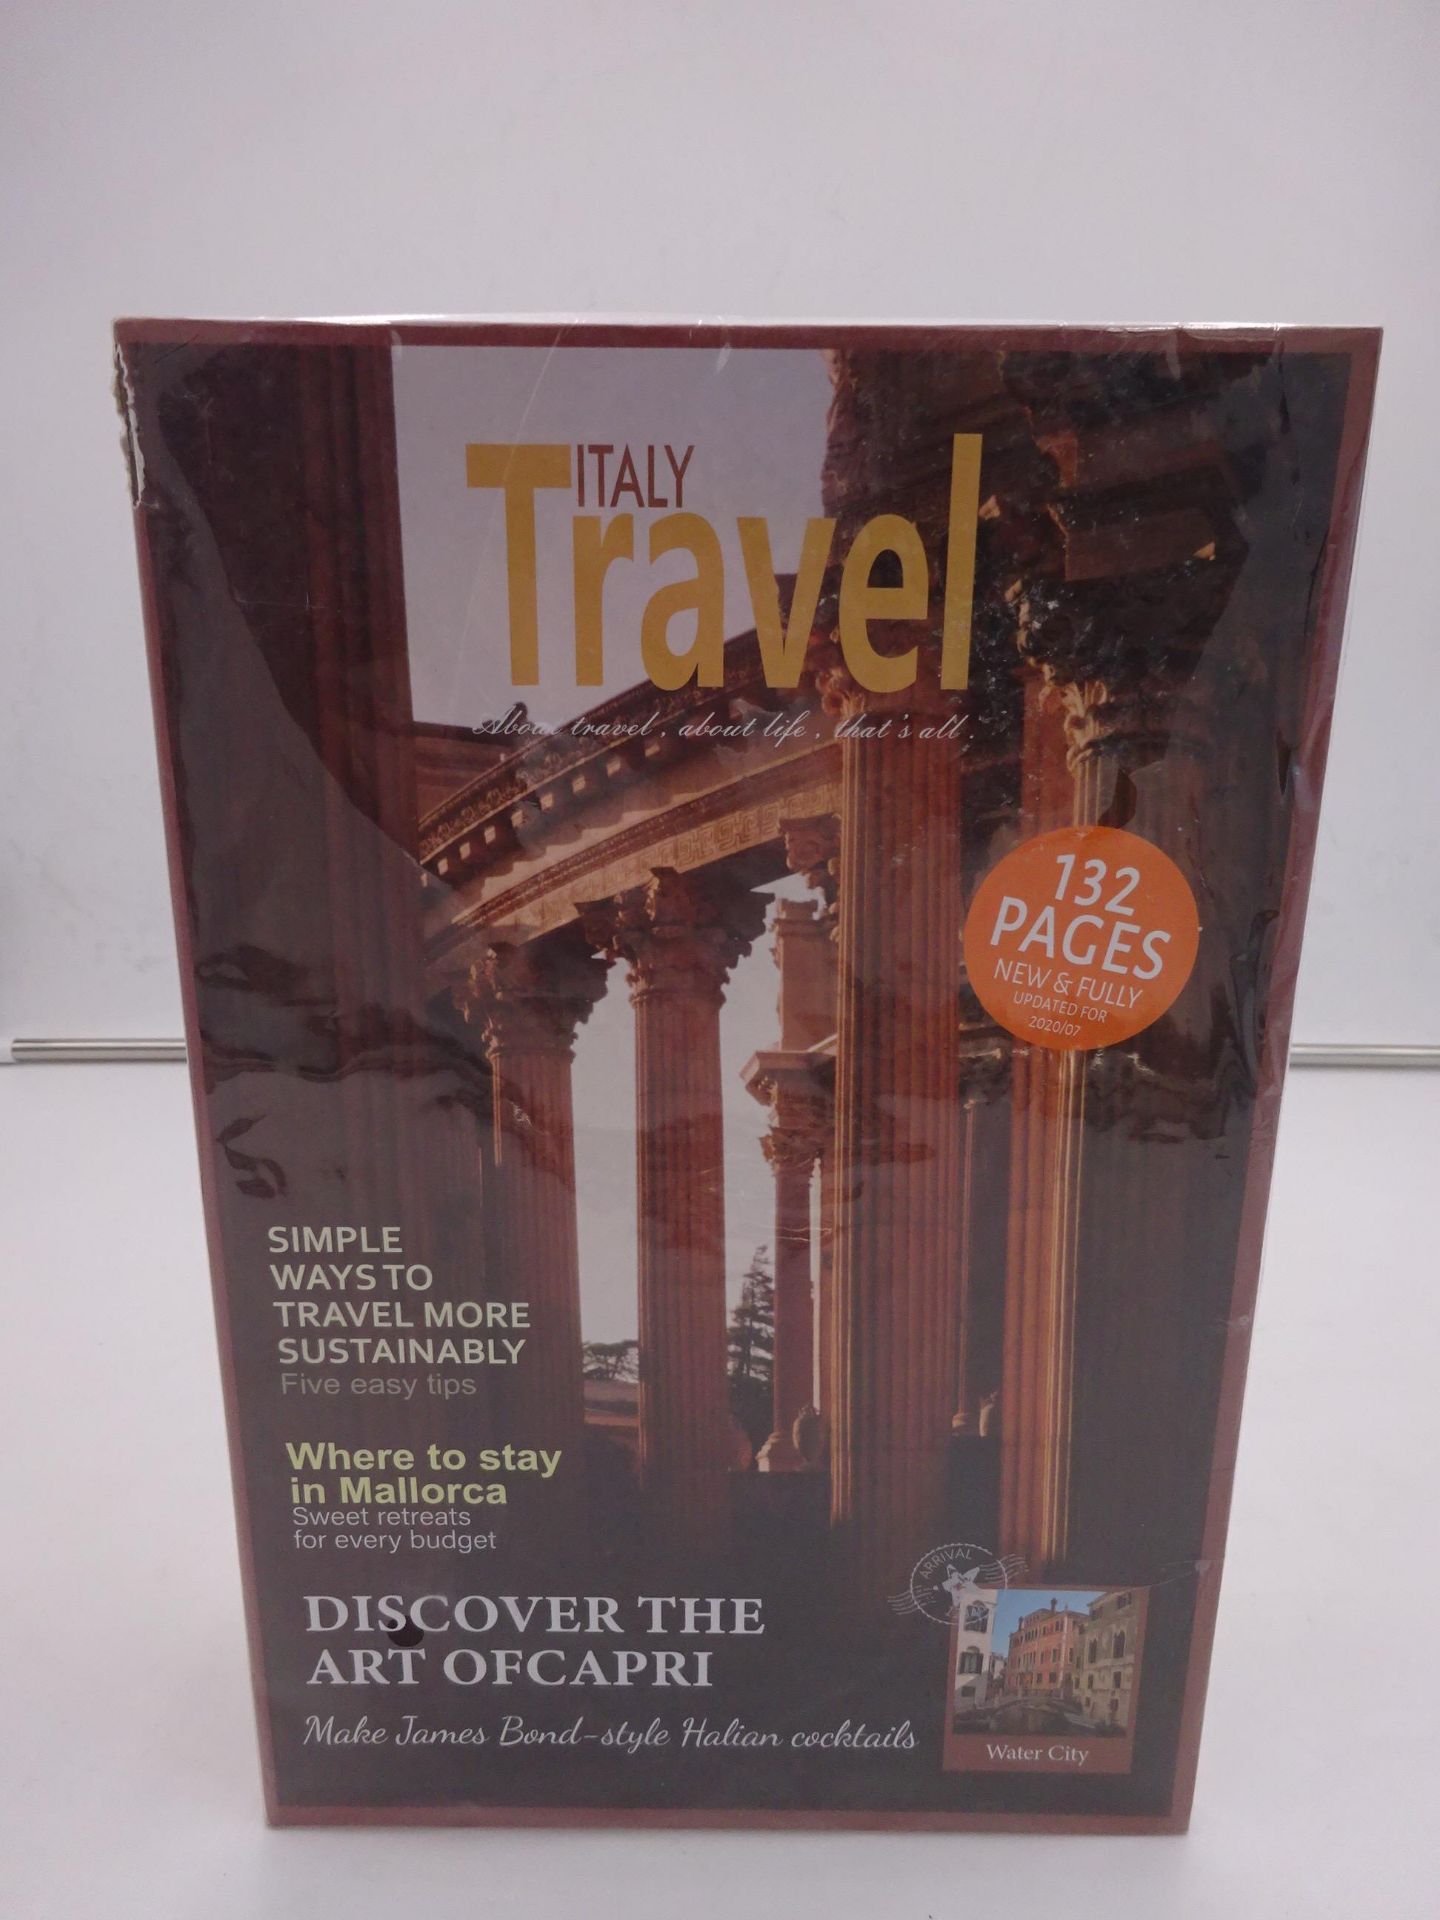 NEW ITALY TRAVEL GUIDE WITH 132 PAGES